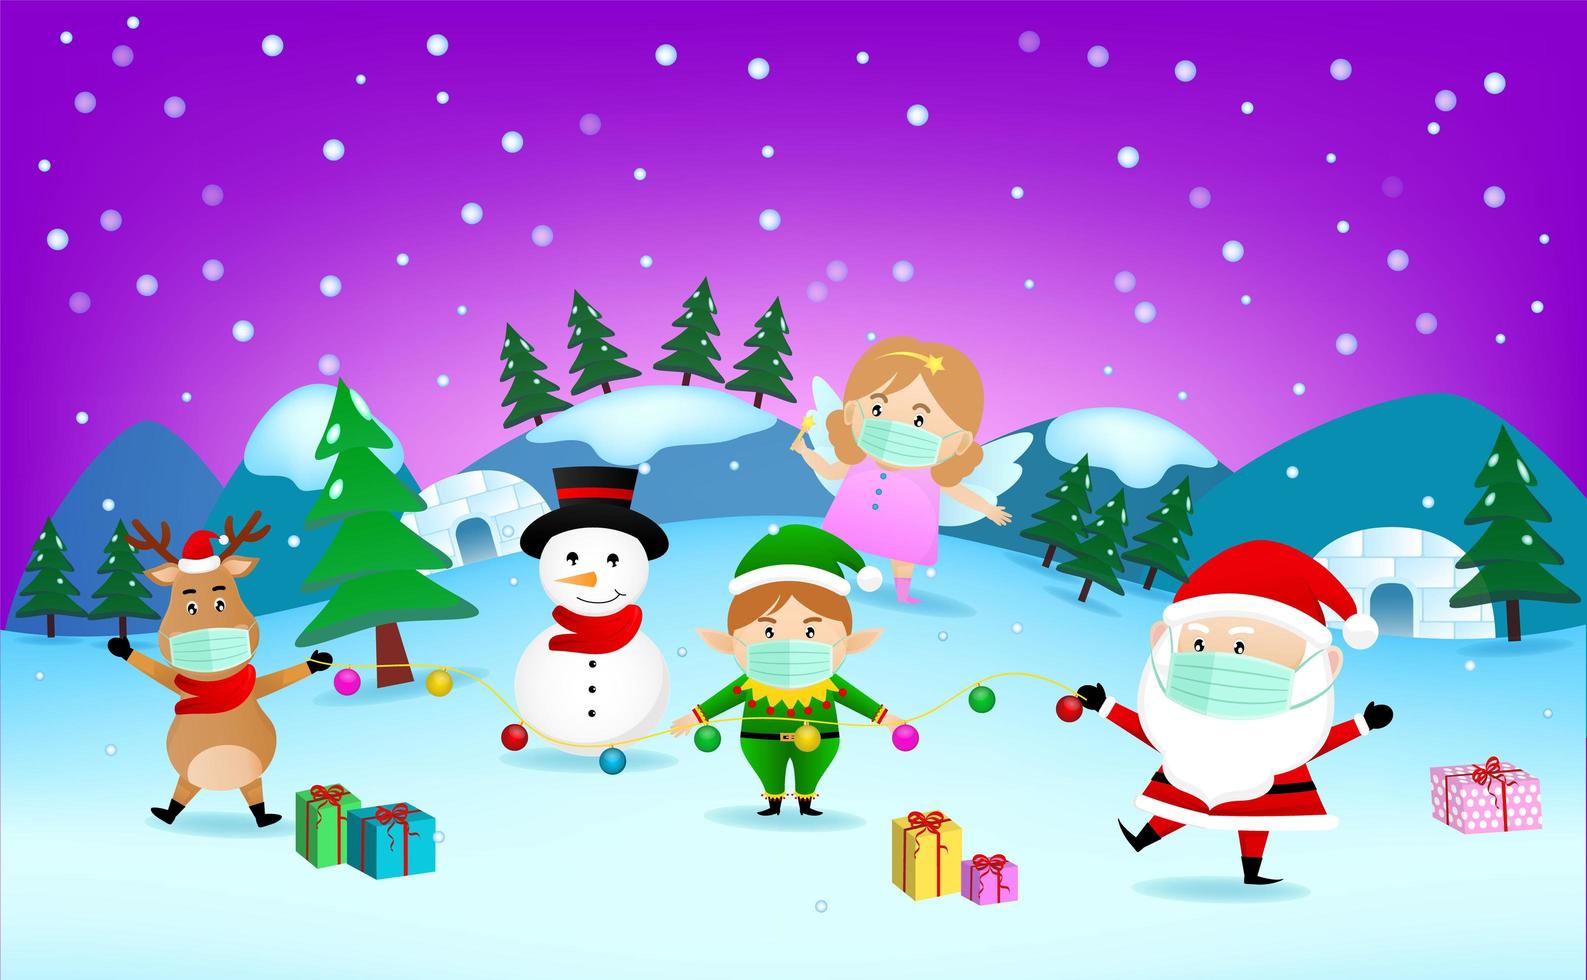 Masked Christmas chracters in winter landscape vector